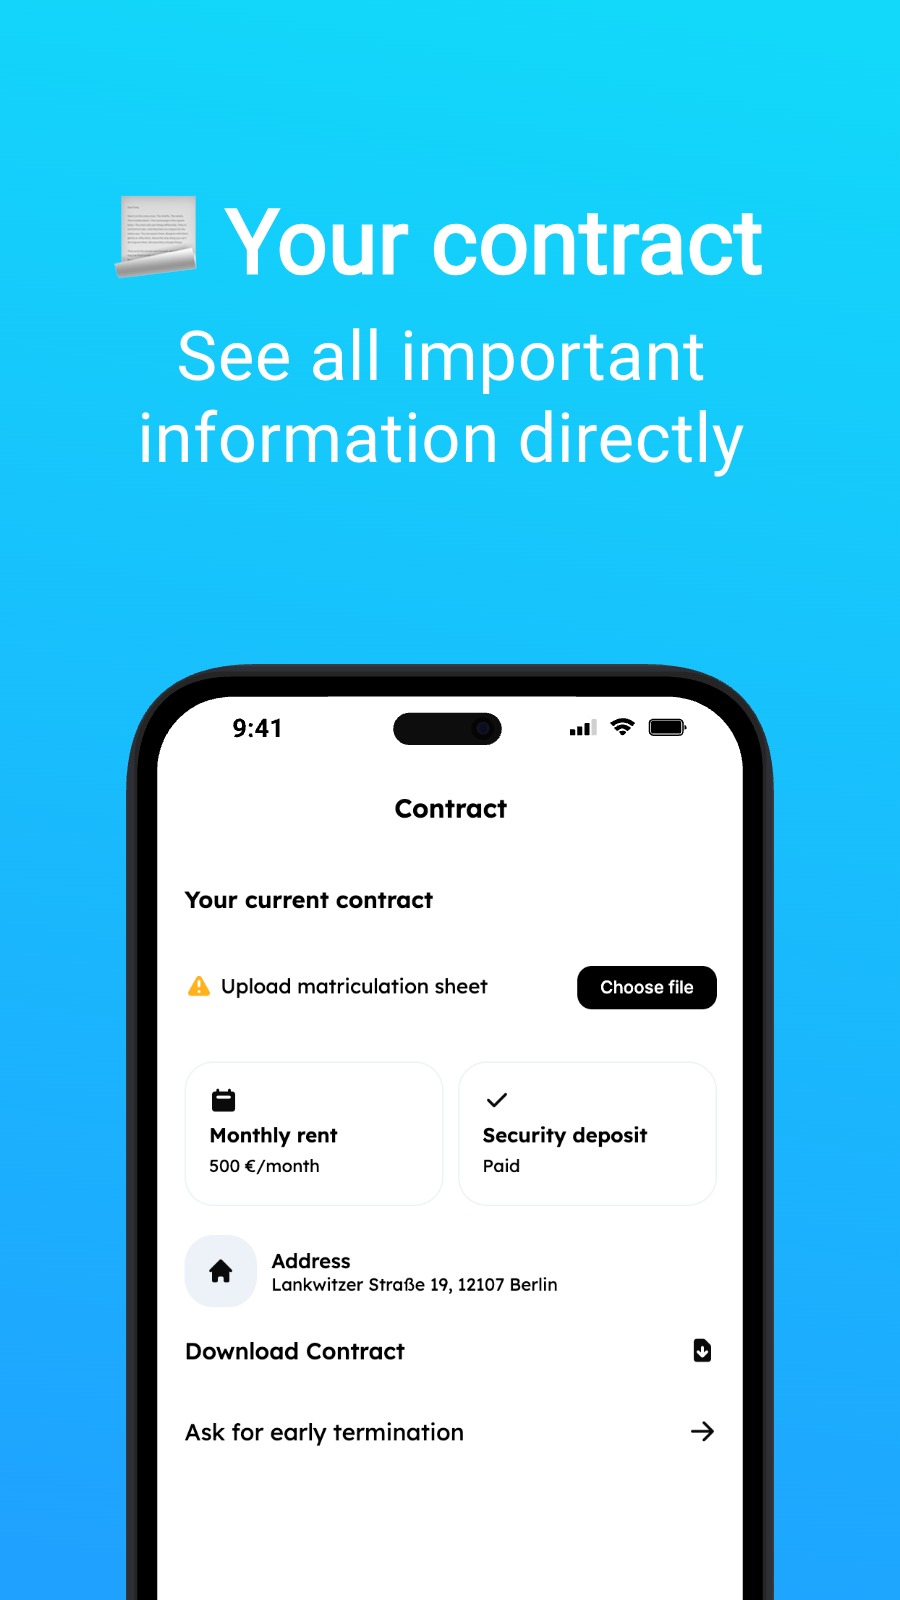 📃 Your contract - See all important information directly